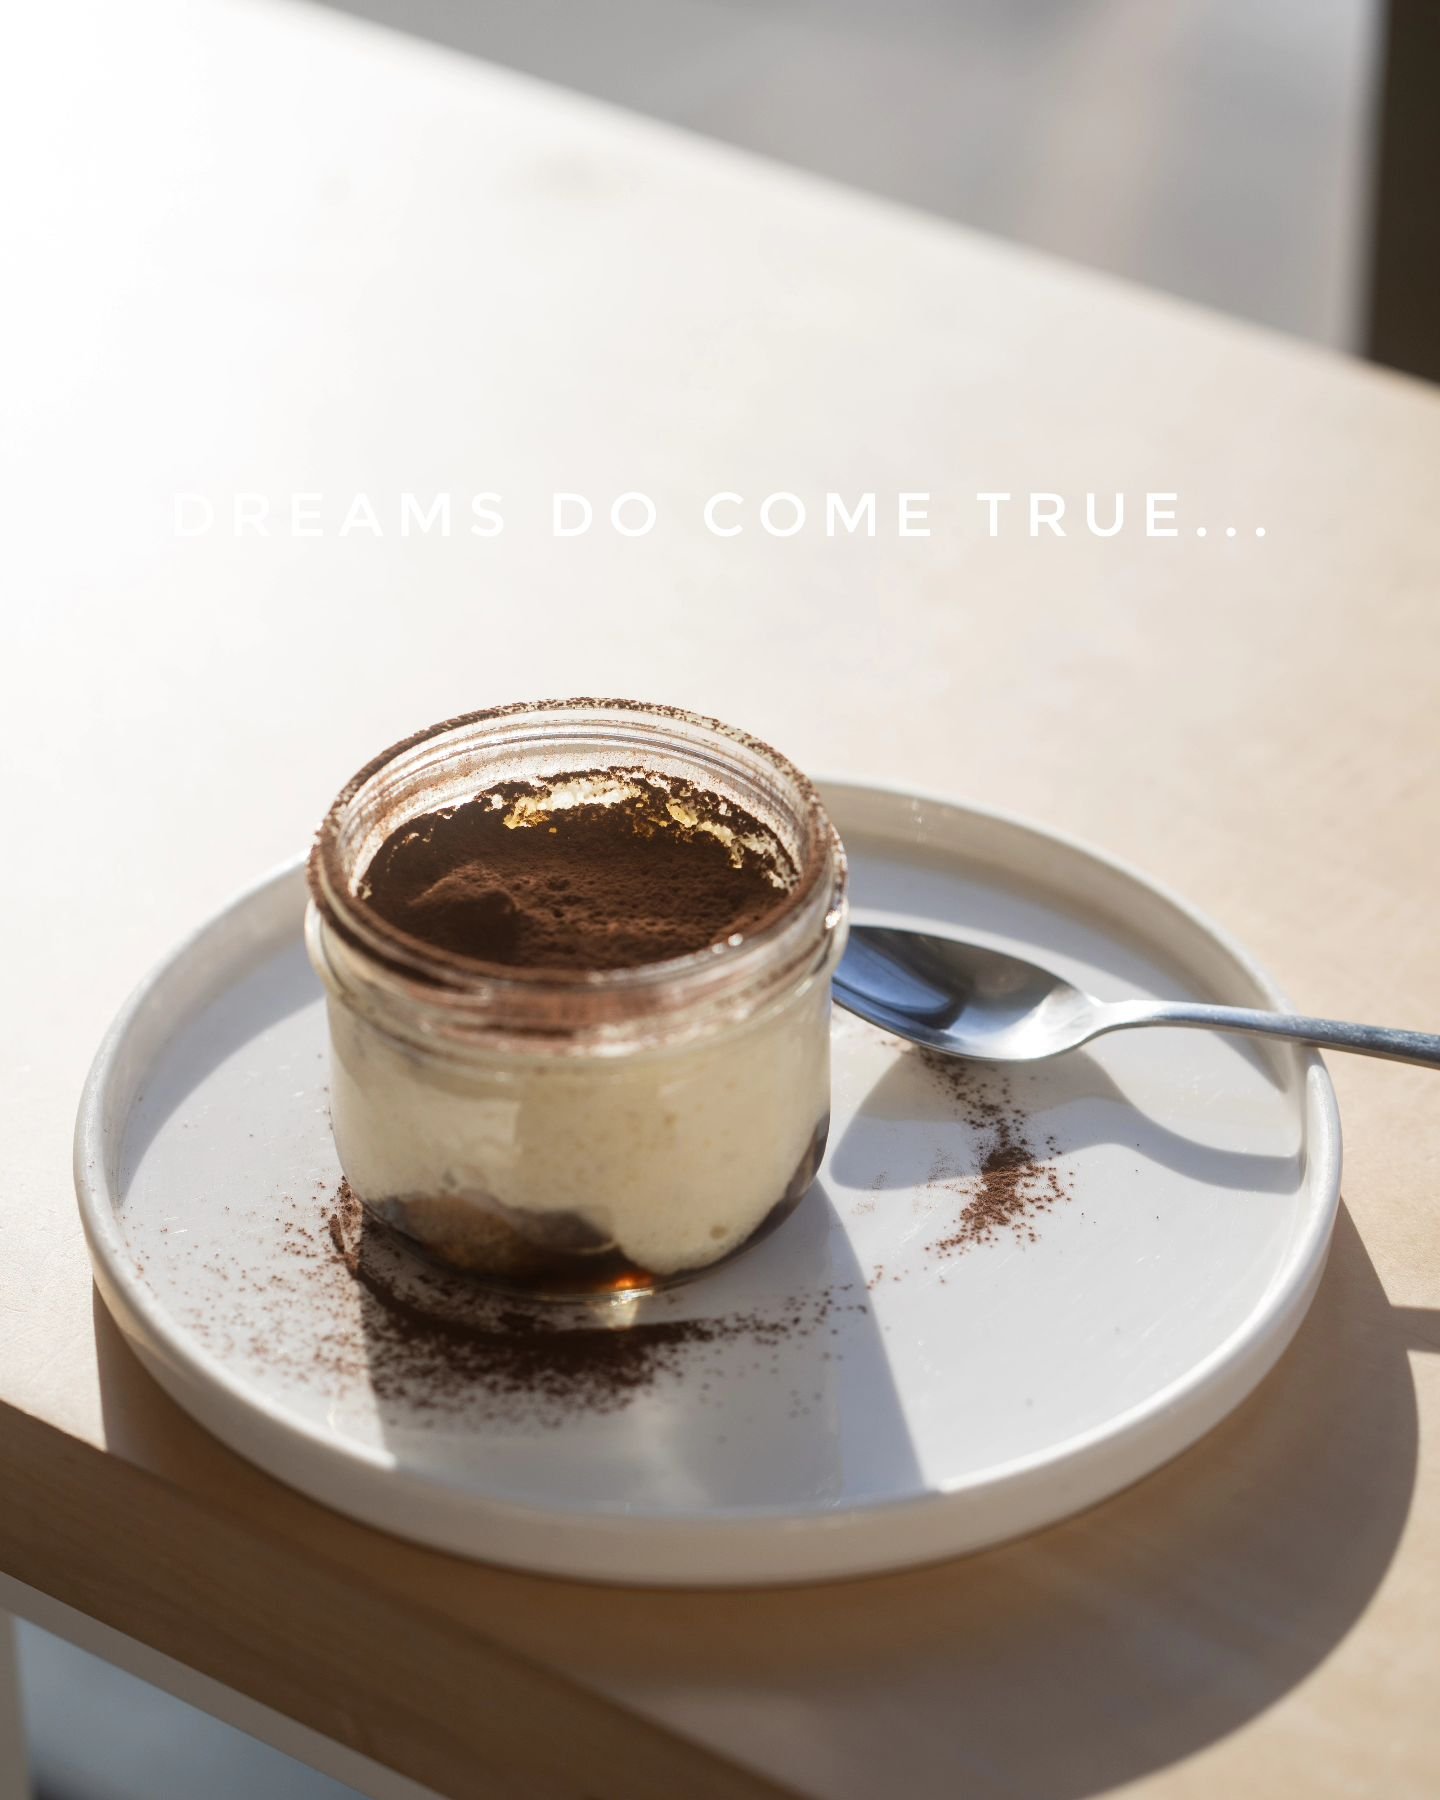 Sometimes some dreams come true! Tiramisu dreams are the best ones! Now a reality at Redwood!